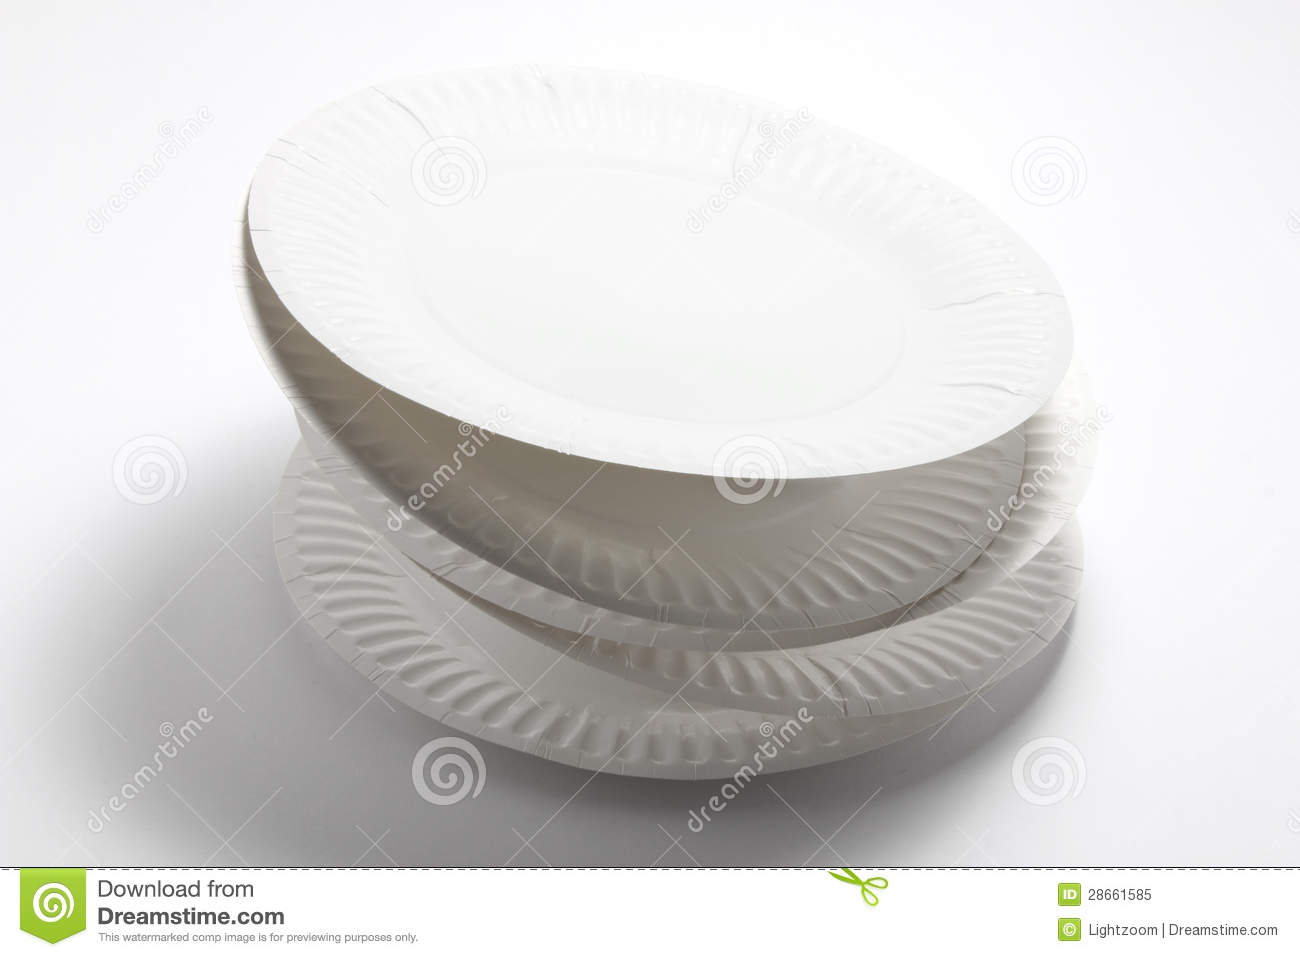 Stack Of Paper Plates Royalty Free Stock Photo   Image  28661585